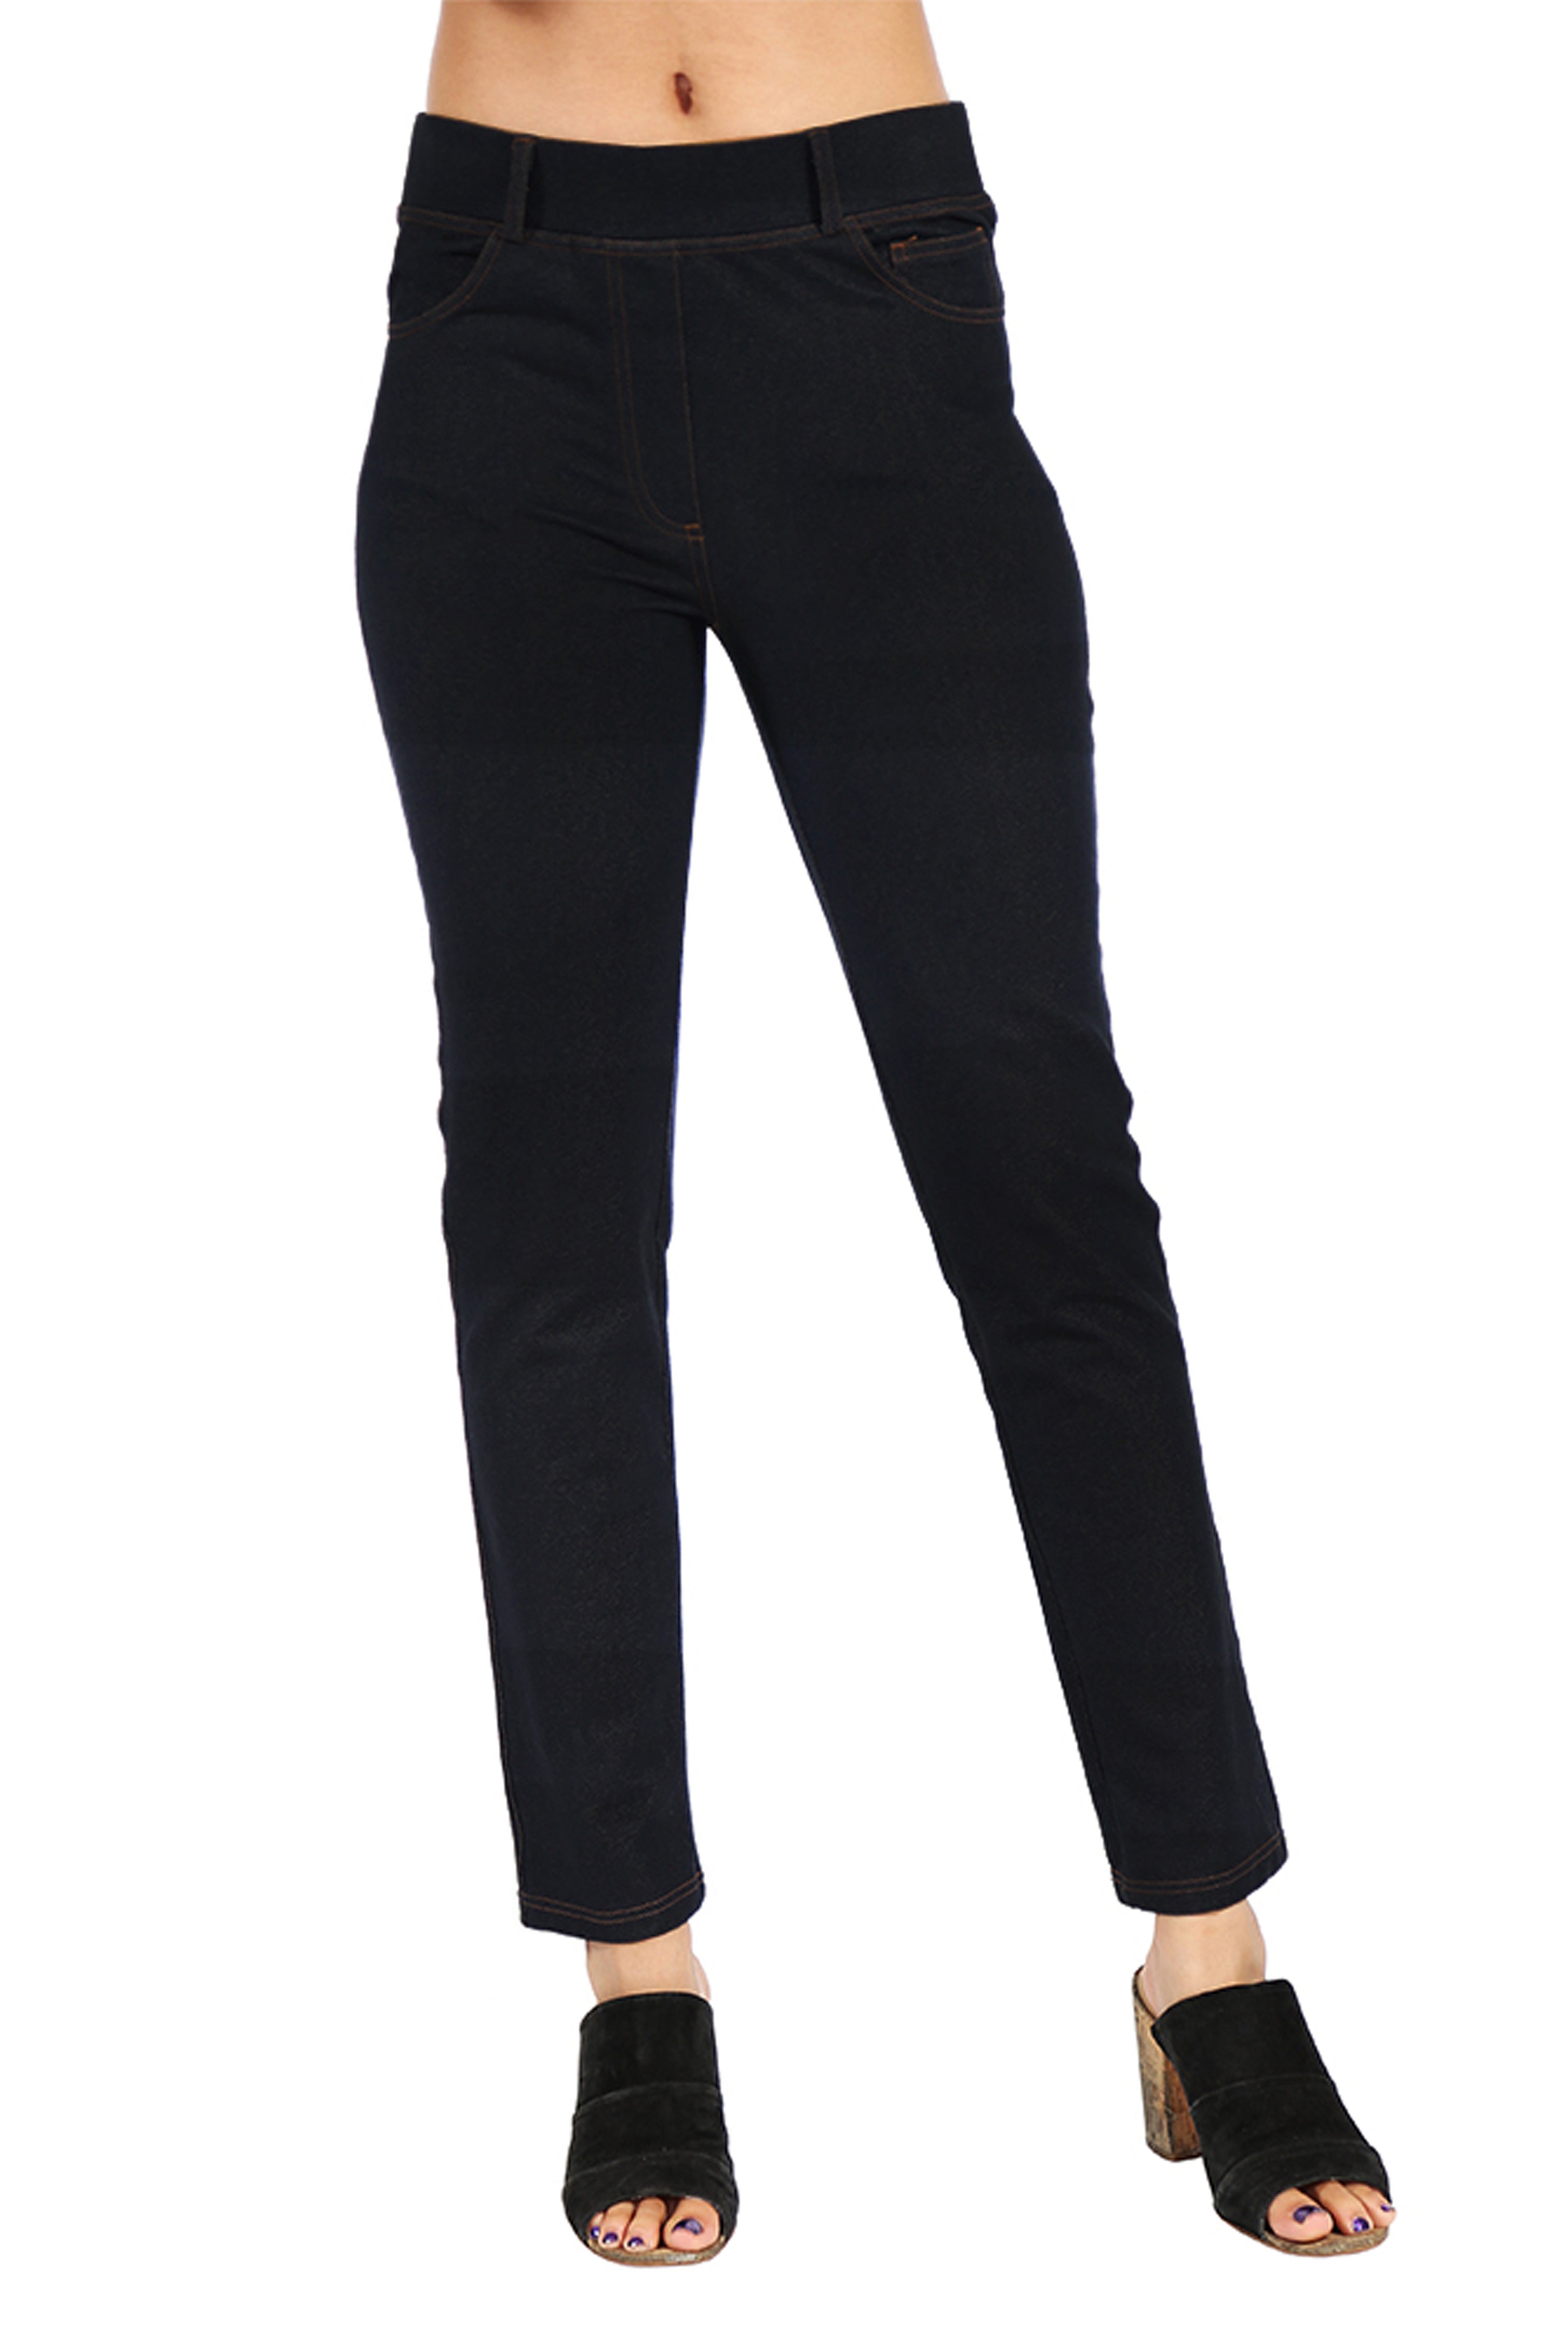 Slim Fit Stretchy Waist Tan Colored Jeggings - Fashion Outlet NYC